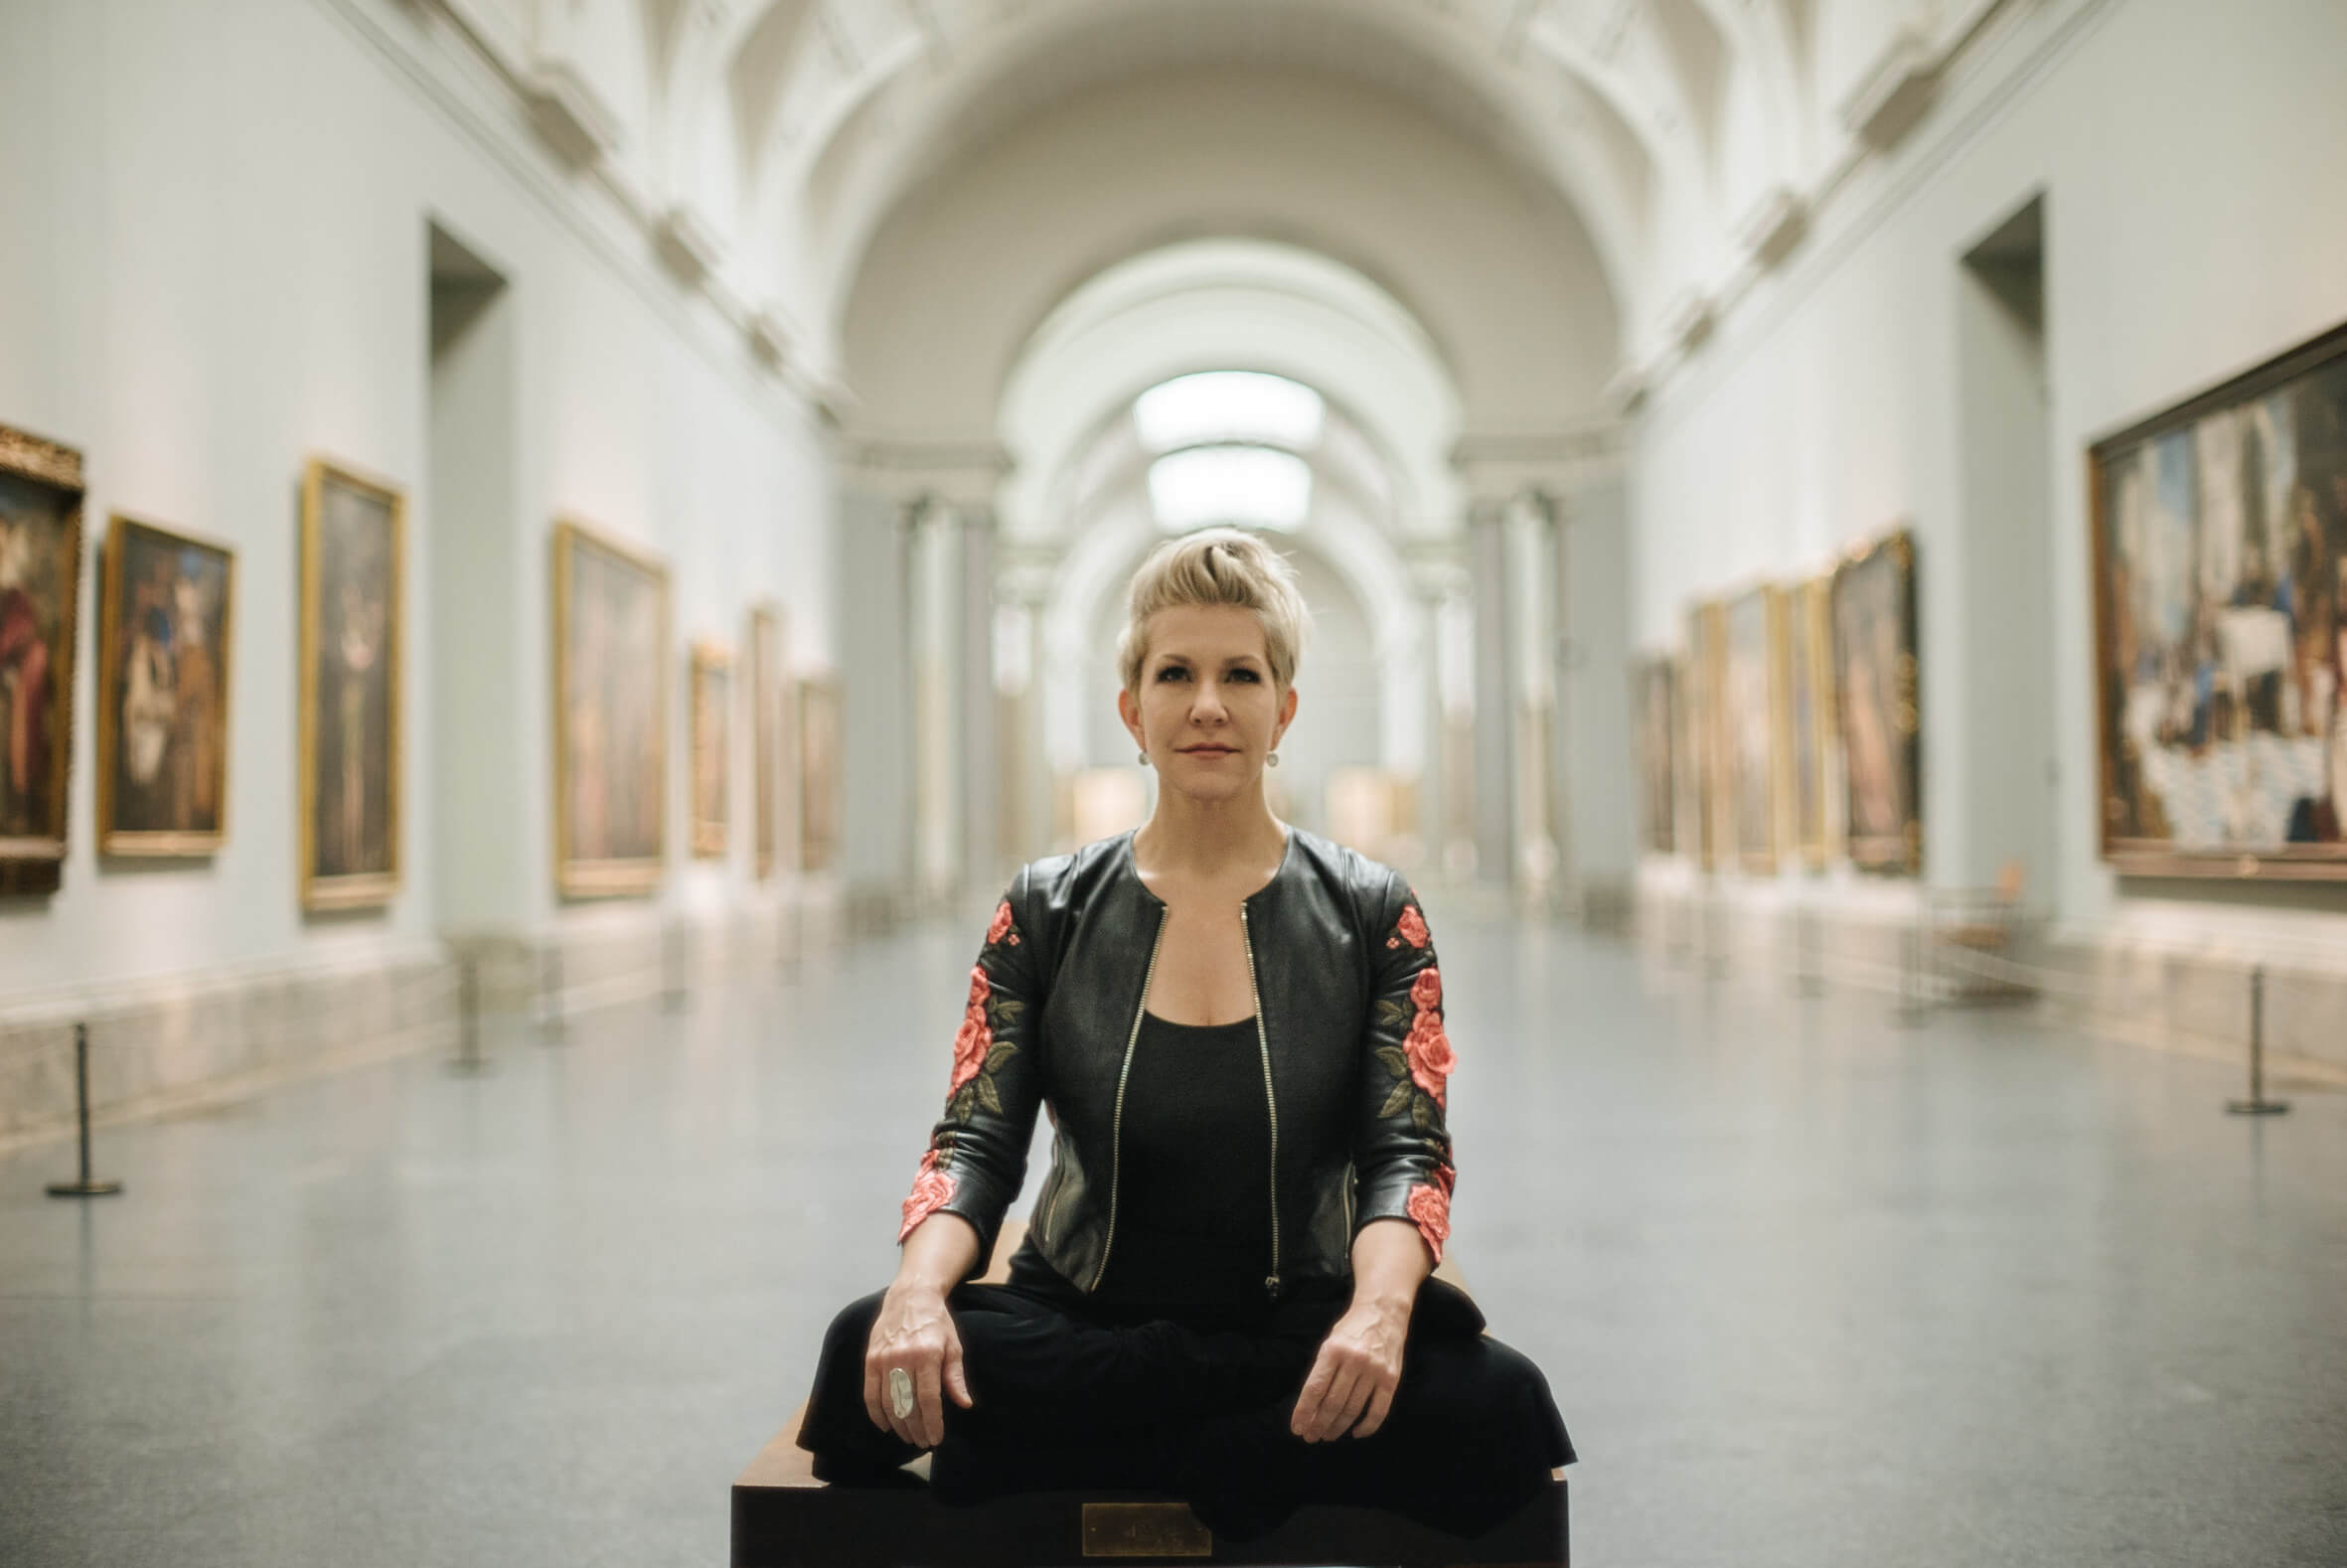 The Art of Museums